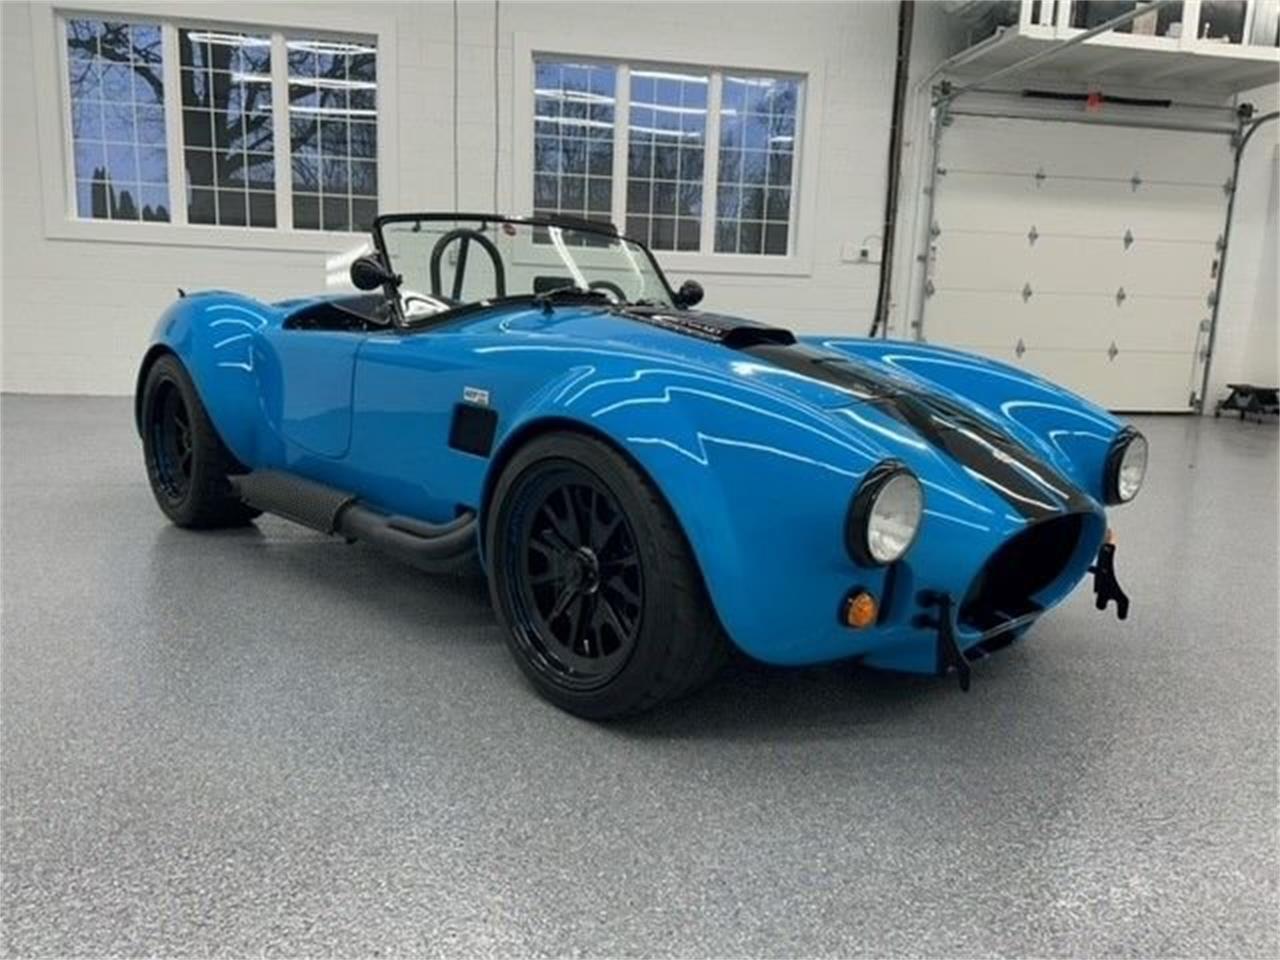 For Sale at Auction: 1965 Shelby Cobra in Greensboro, North Carolina for sale in Greensboro, NC